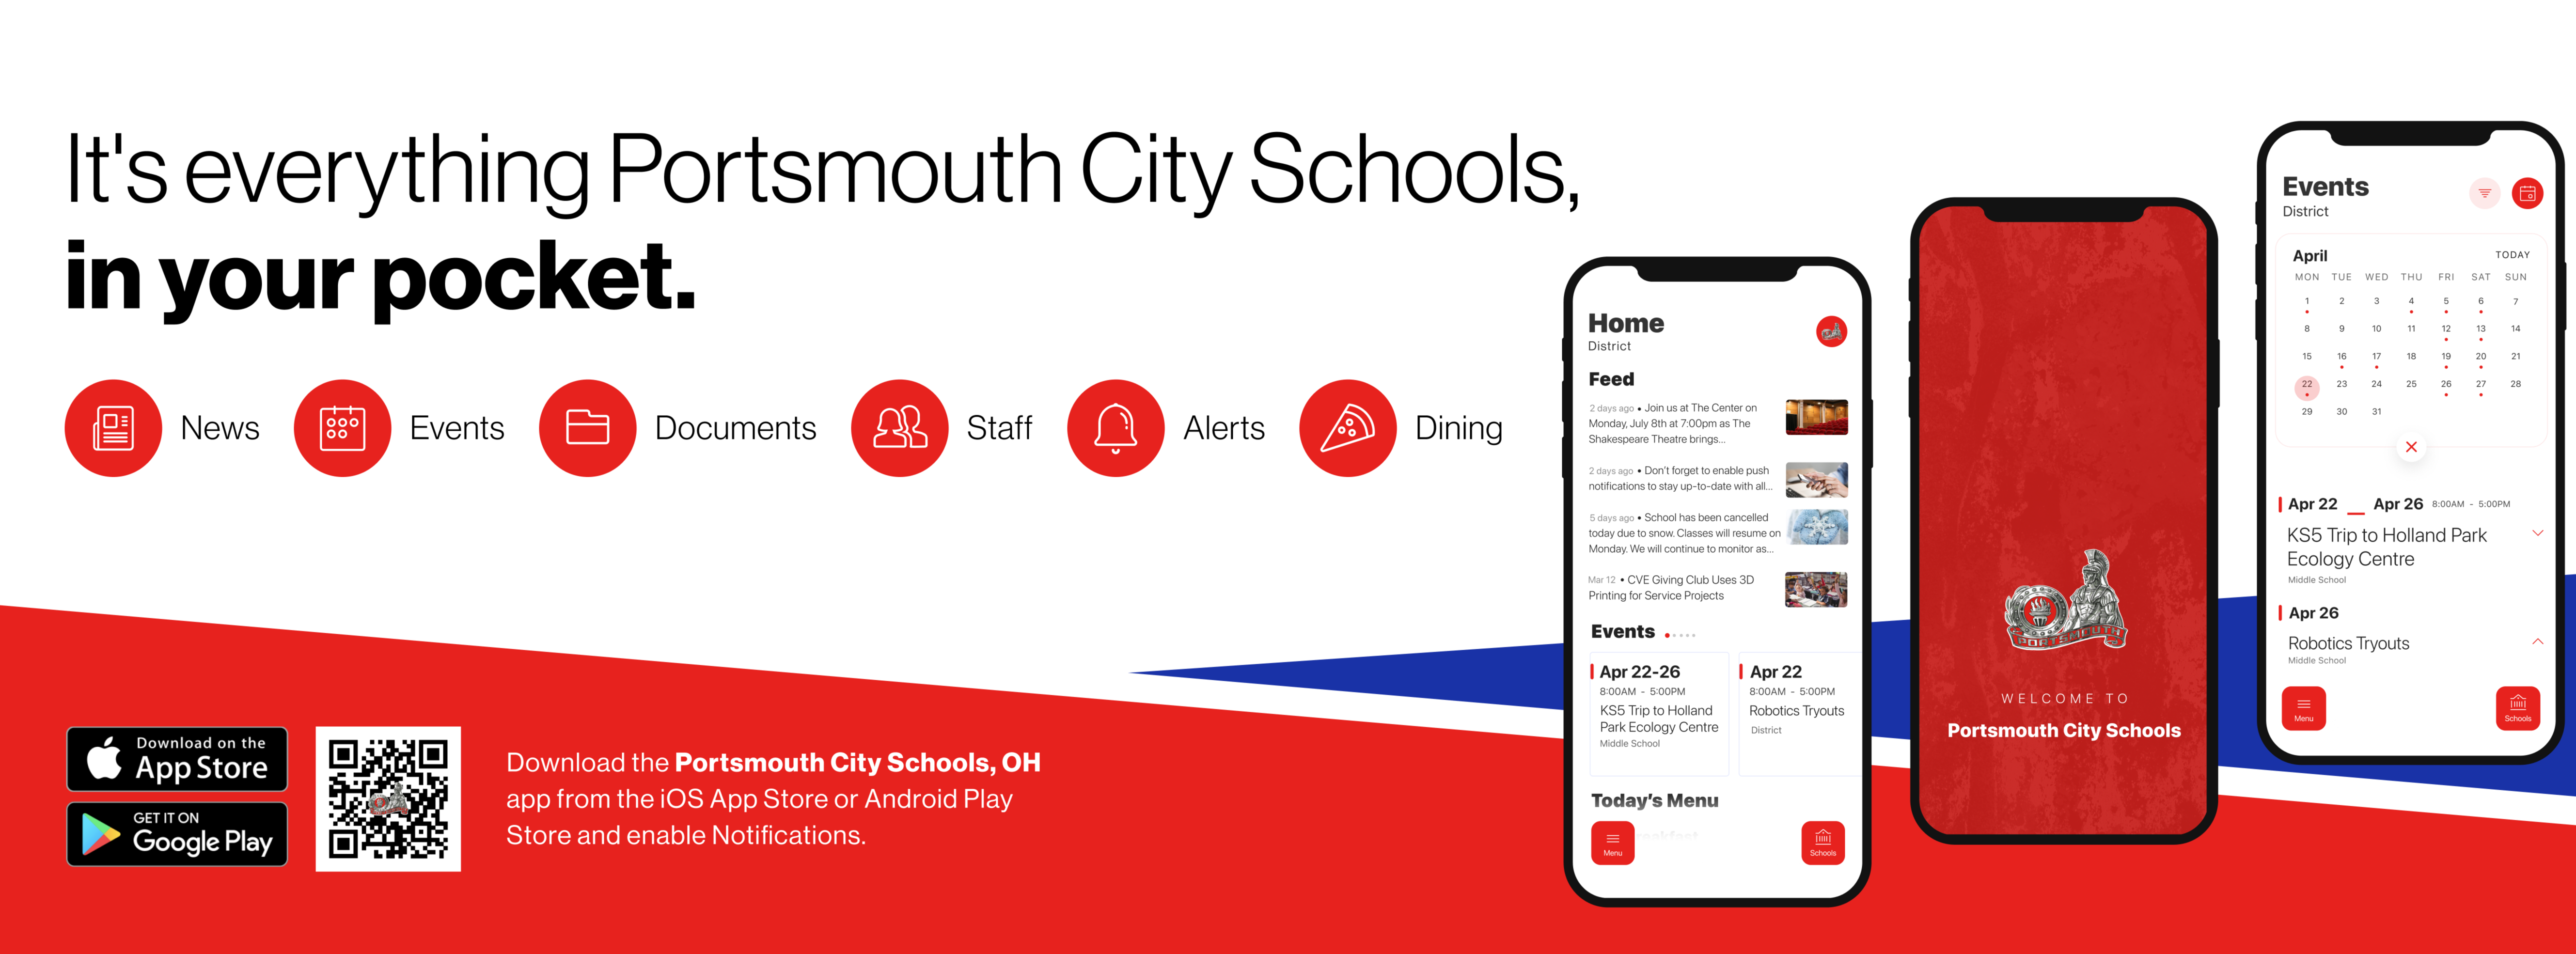 It's everything Portsmouth City Schools, in your pocket.